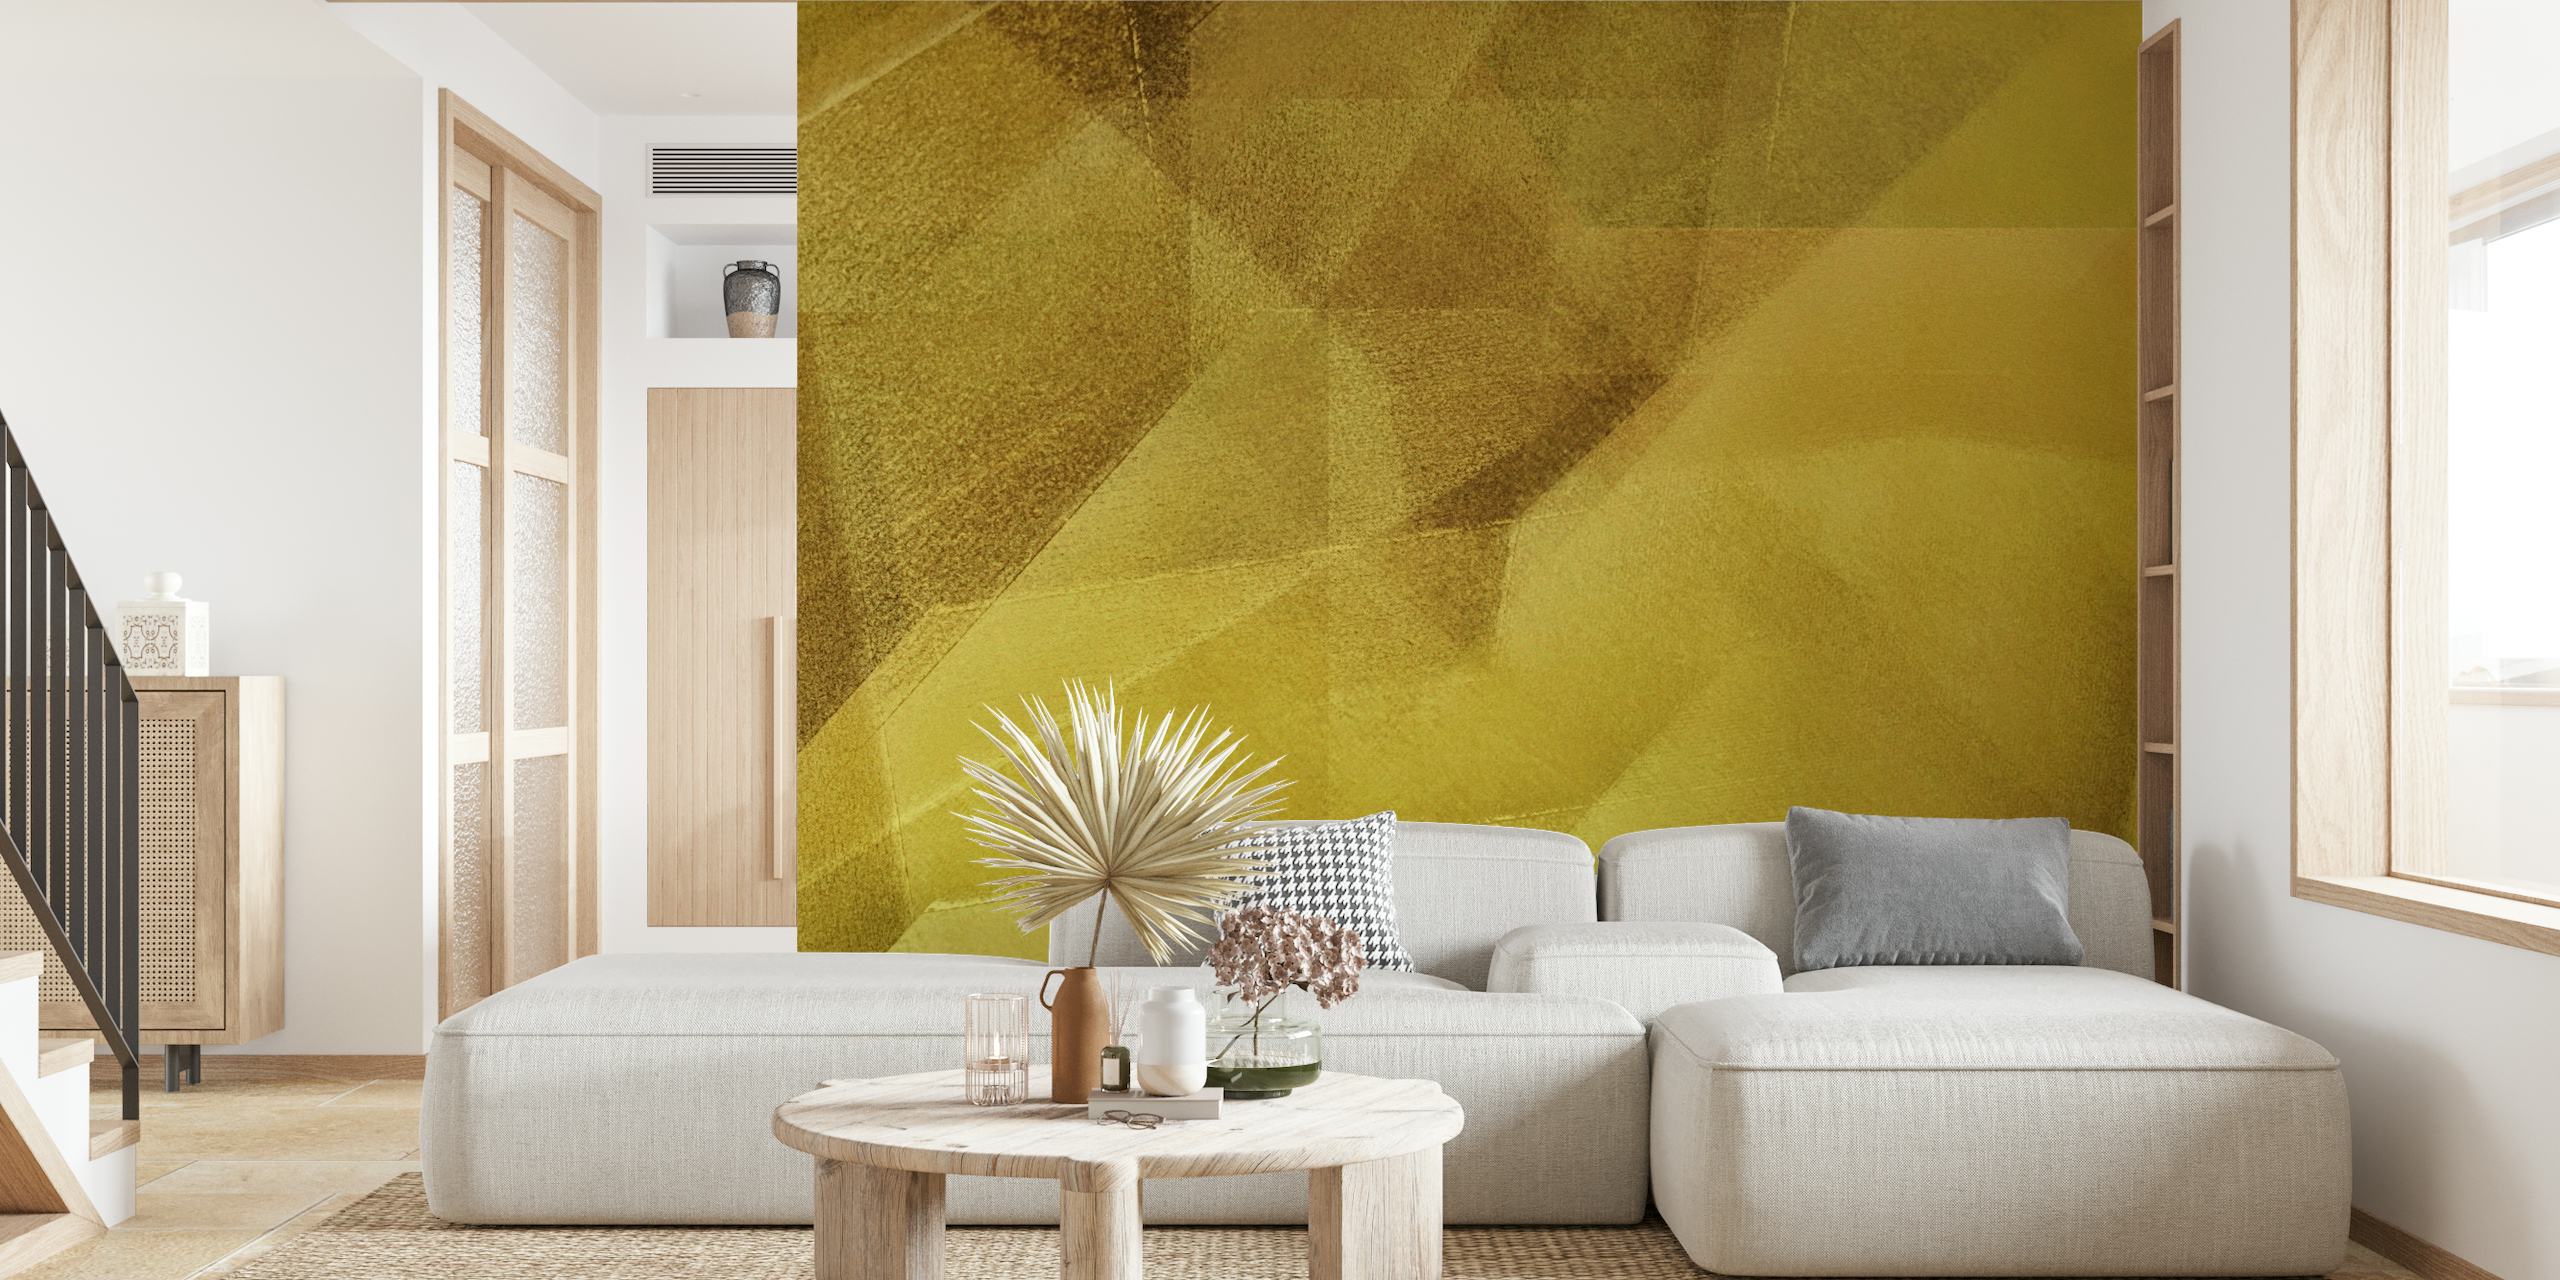 Geometric gold-toned wall mural with abstract pattern for sophisticated interior design